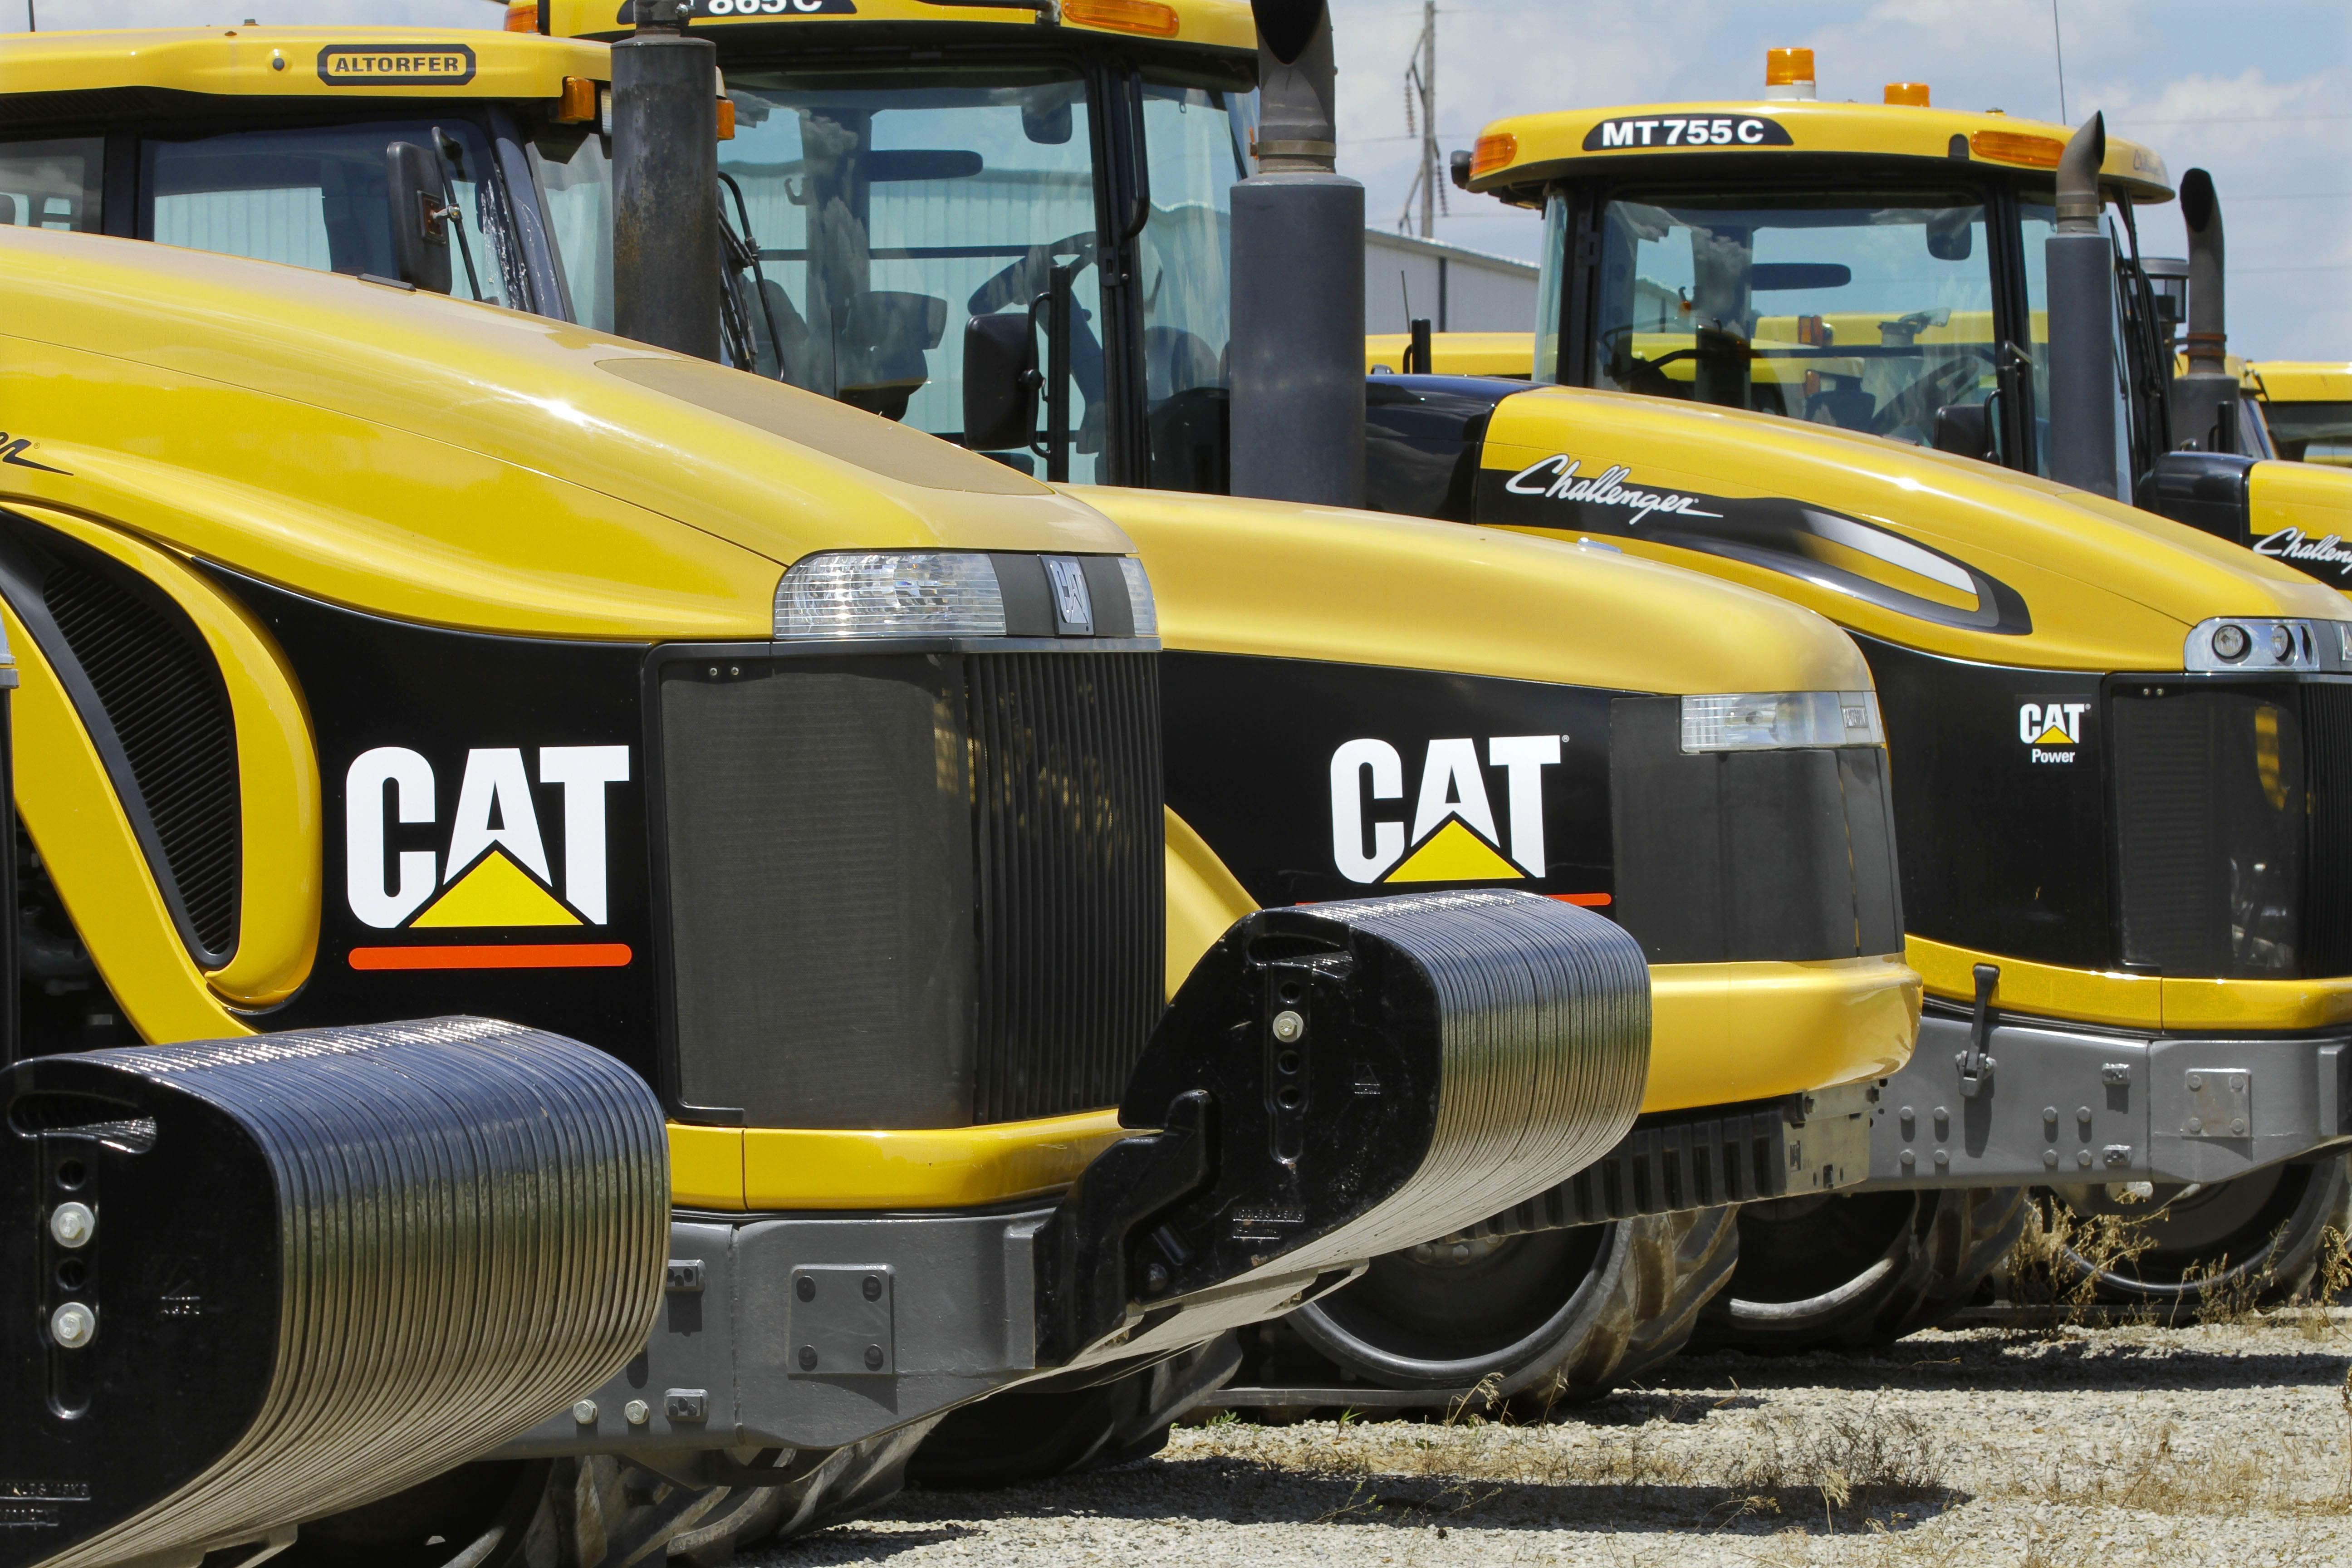  this June 20, 2012 file photo, earth-moving tractors and equipment made by Peoria, Ill.-based Caterpillar Inc. are seen in Clinton, Ill.